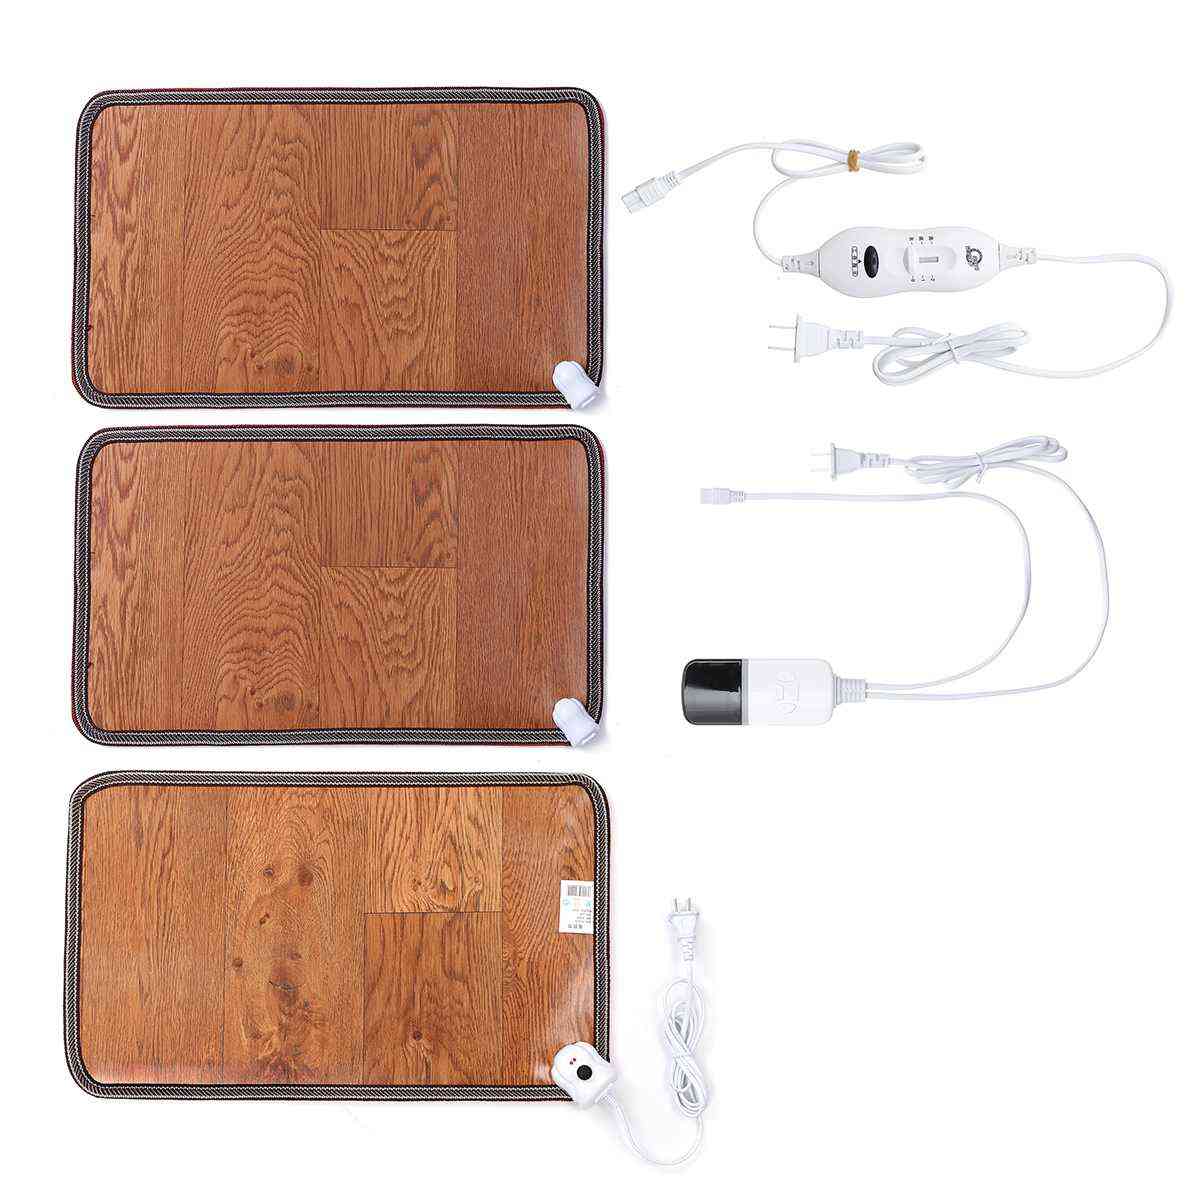 Leather Electric Heating Foot Mat Warmer Pads - Feet Leg Warmer Carpet Thermostat Warming Tools